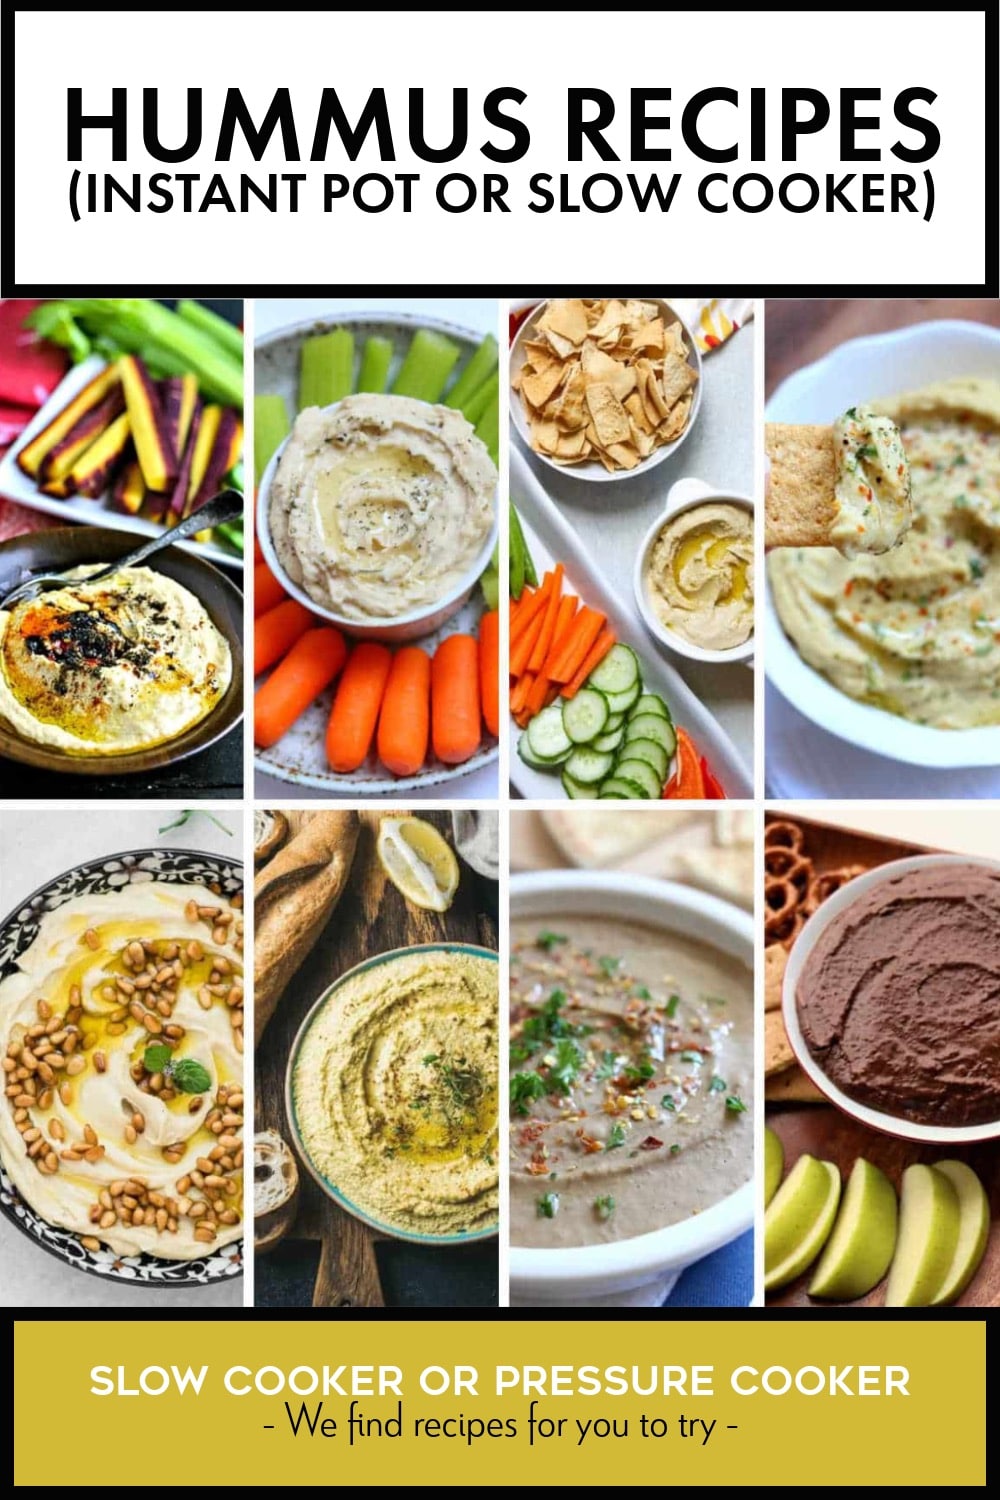 Pinterest image of Hummus Recipes (Slow Cooker and Instant Pot)